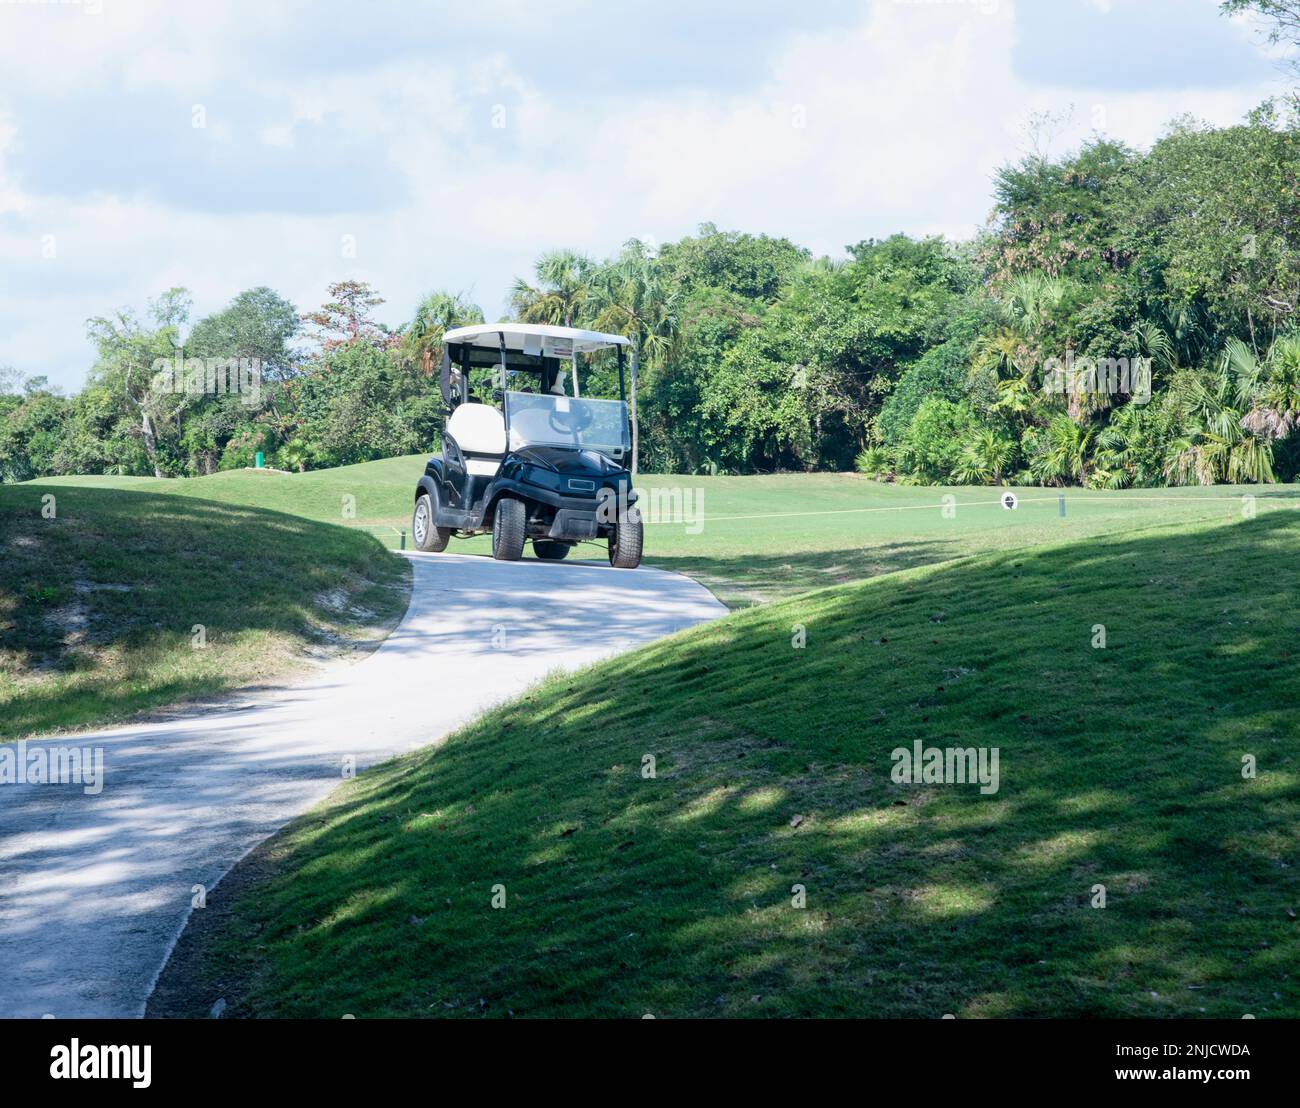 A golf car in the exotic golf course on a summer day in Mexico Stock Photo